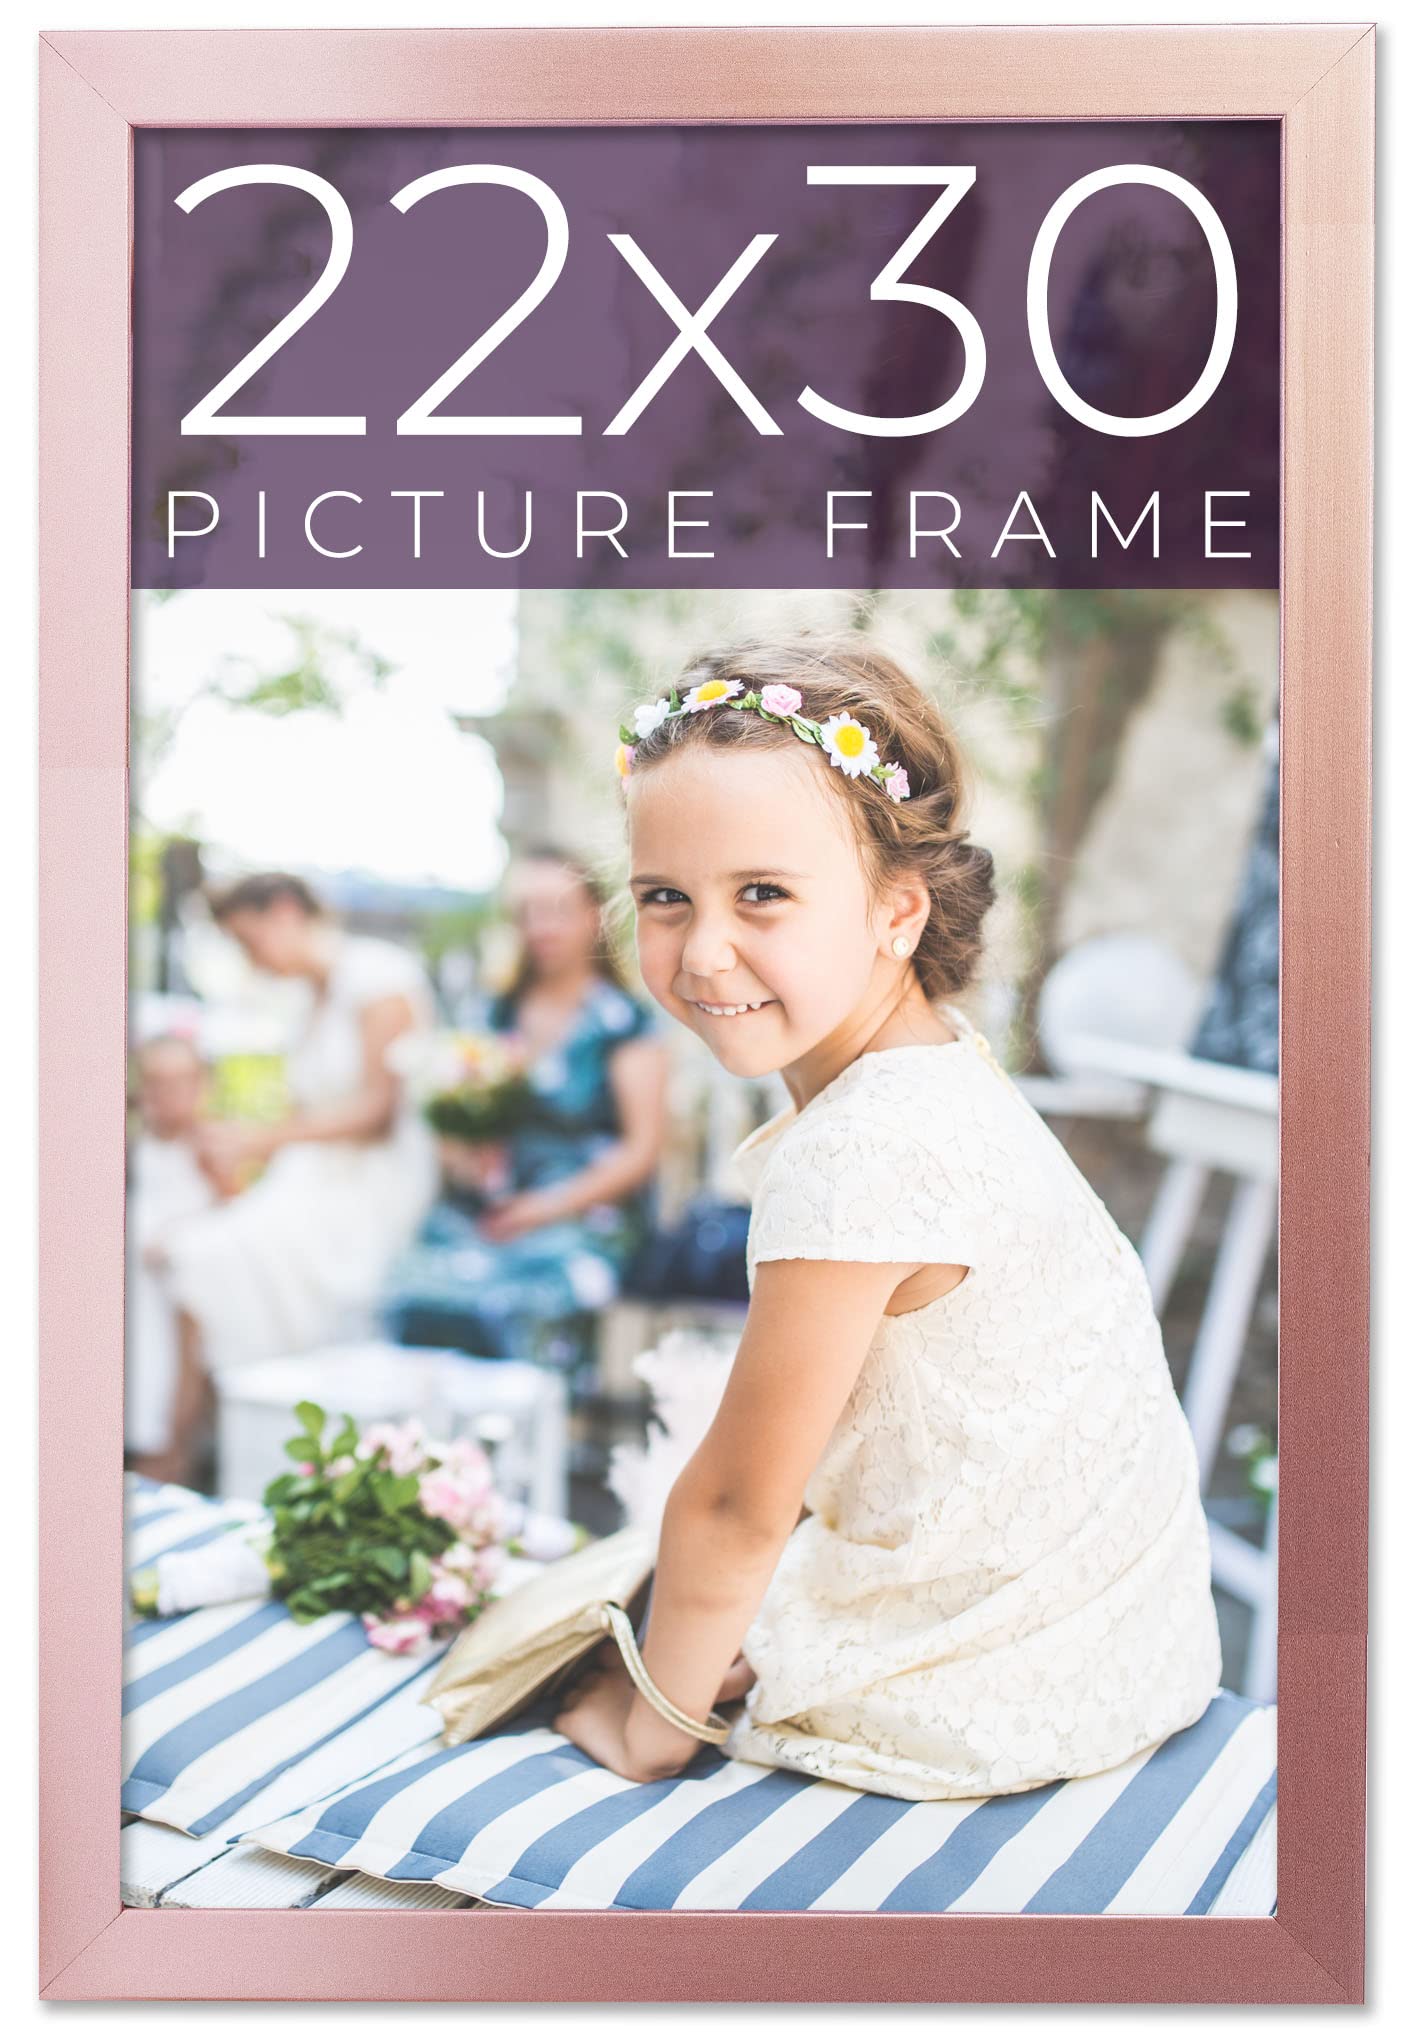 22 x 30 picture frame